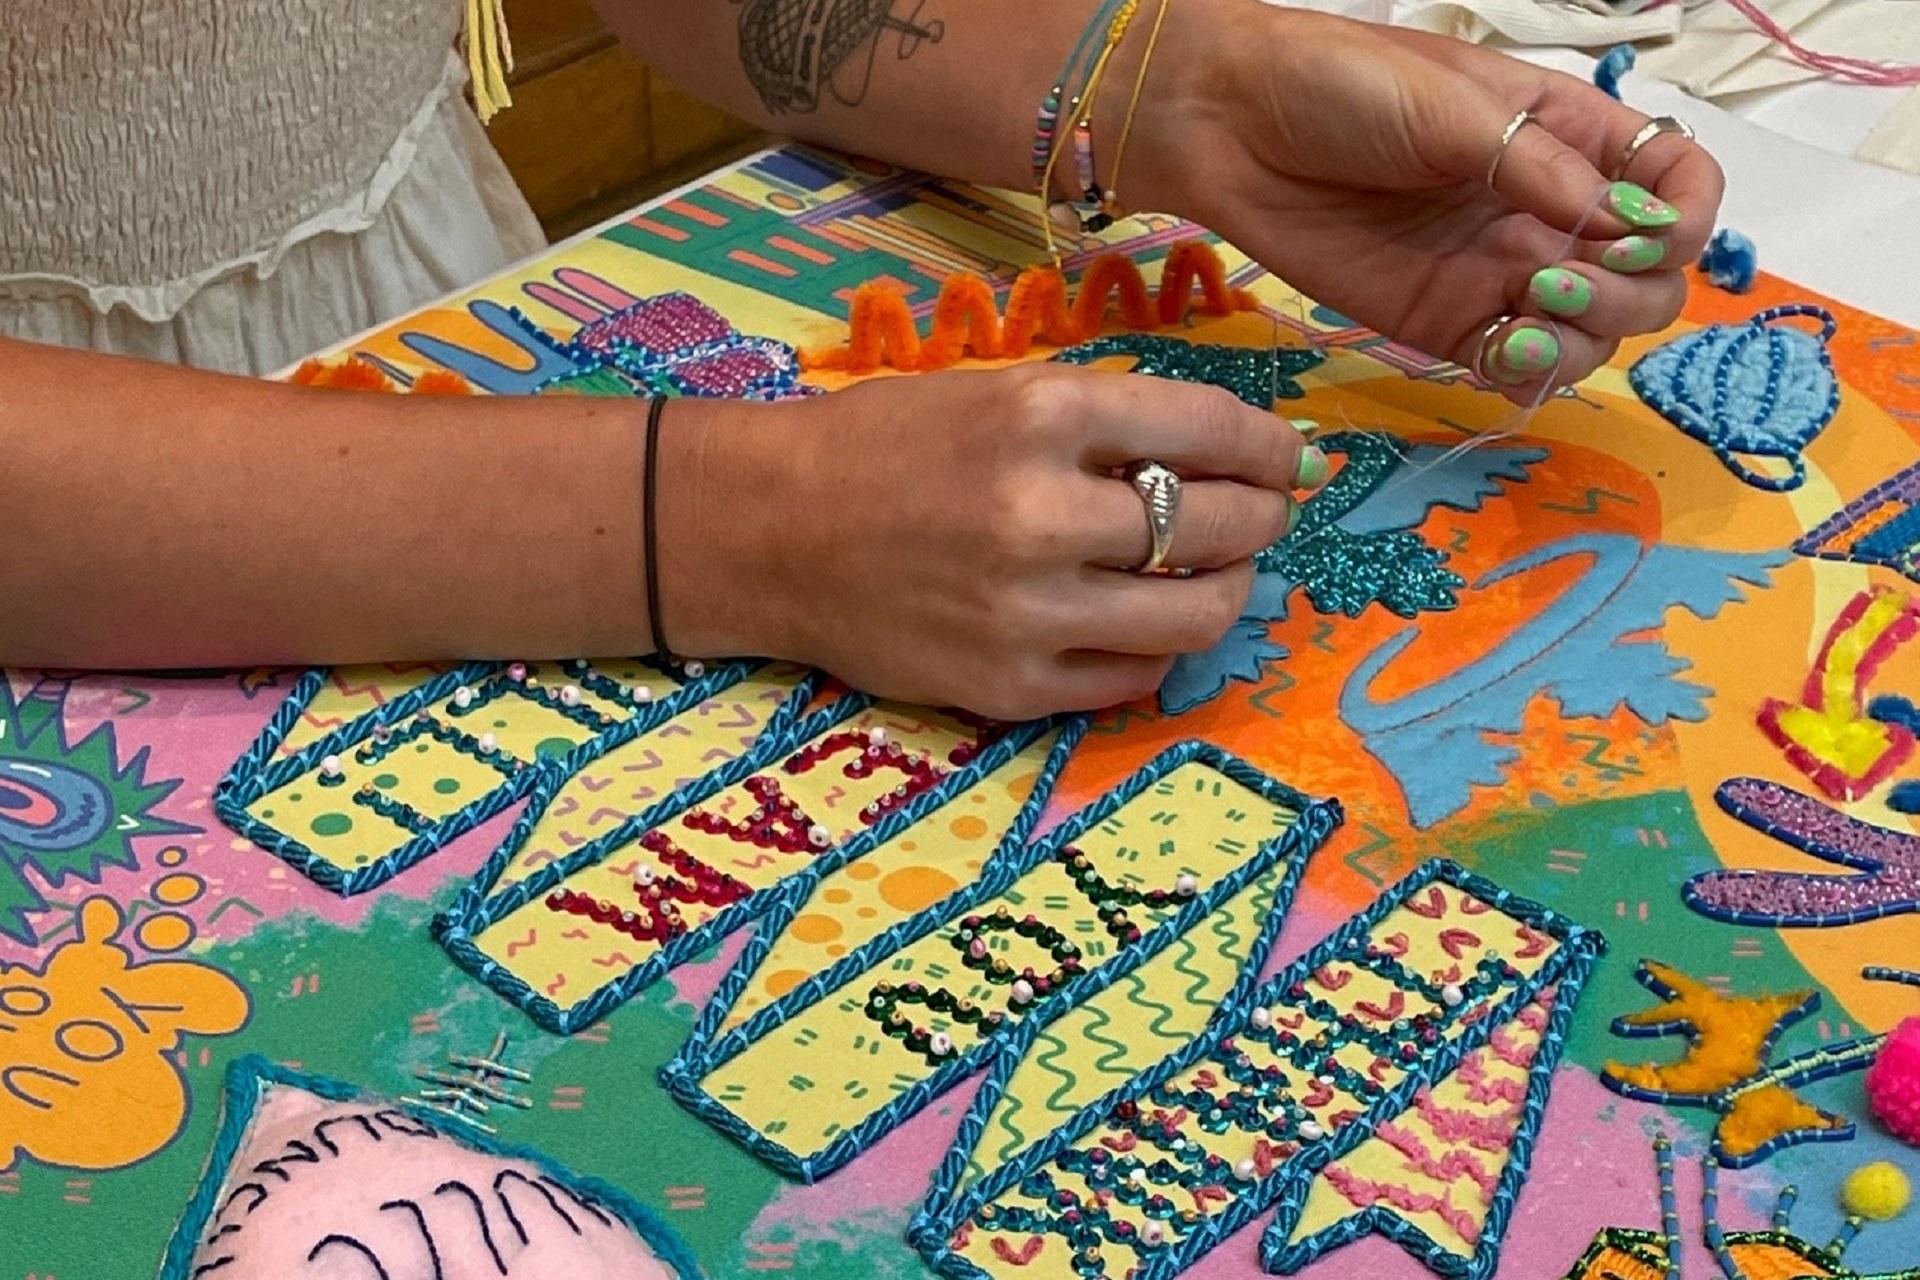 The pair of hands of an artist working on an embroidered piece of artwork